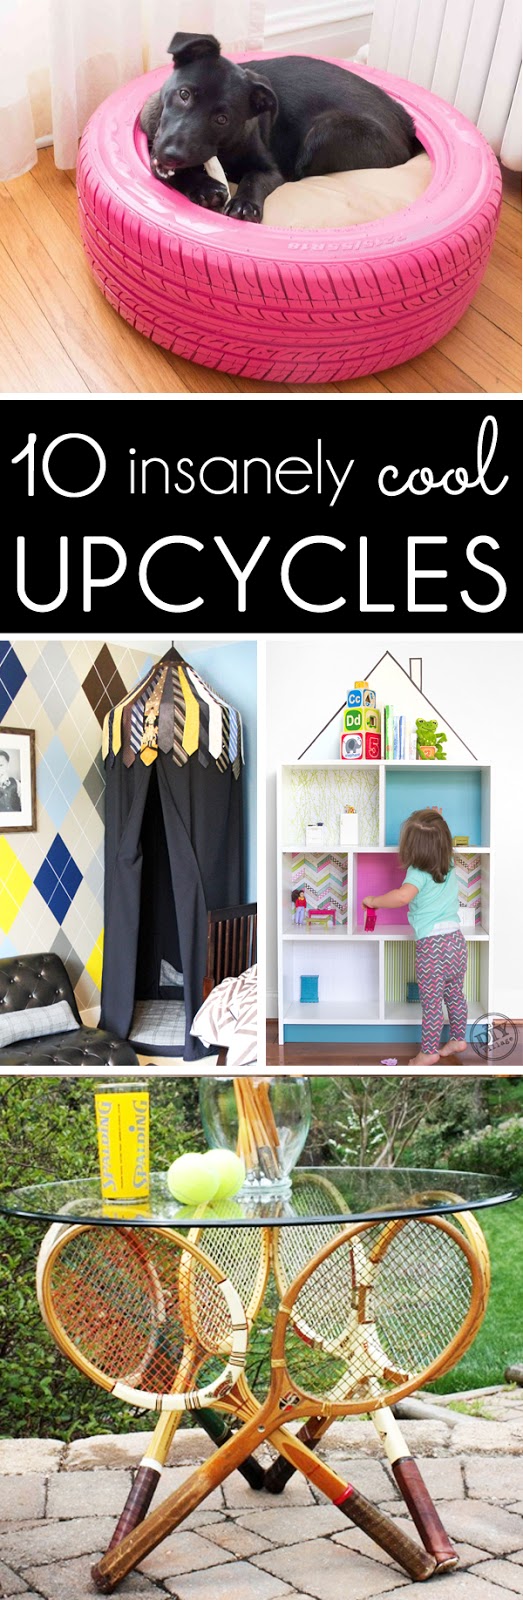  diy with style 10 Insanely Cool Upcycle  Projects  Blue 